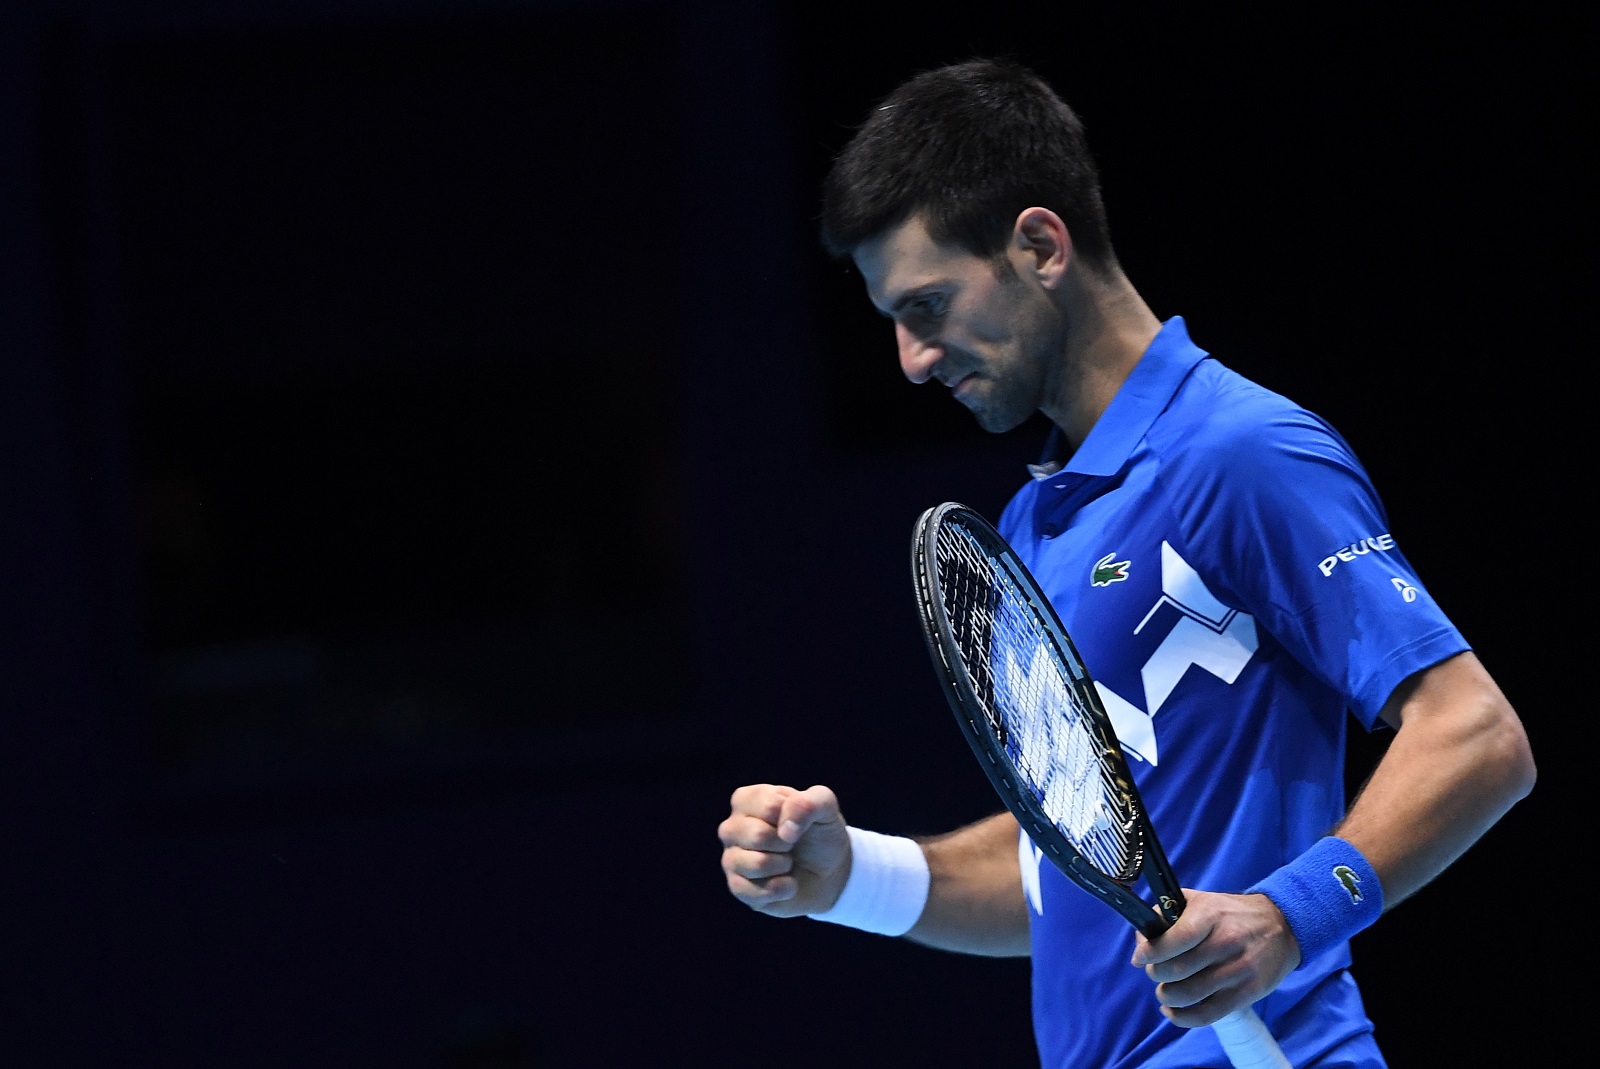 epa08831432 Novak Djokovic of Serbia in action against Alexander Zverev of Germany during their group stage match at the ATP Finals tennis tournament in London, Britain, 20 November 2020.  EPA/ANDY RAIN